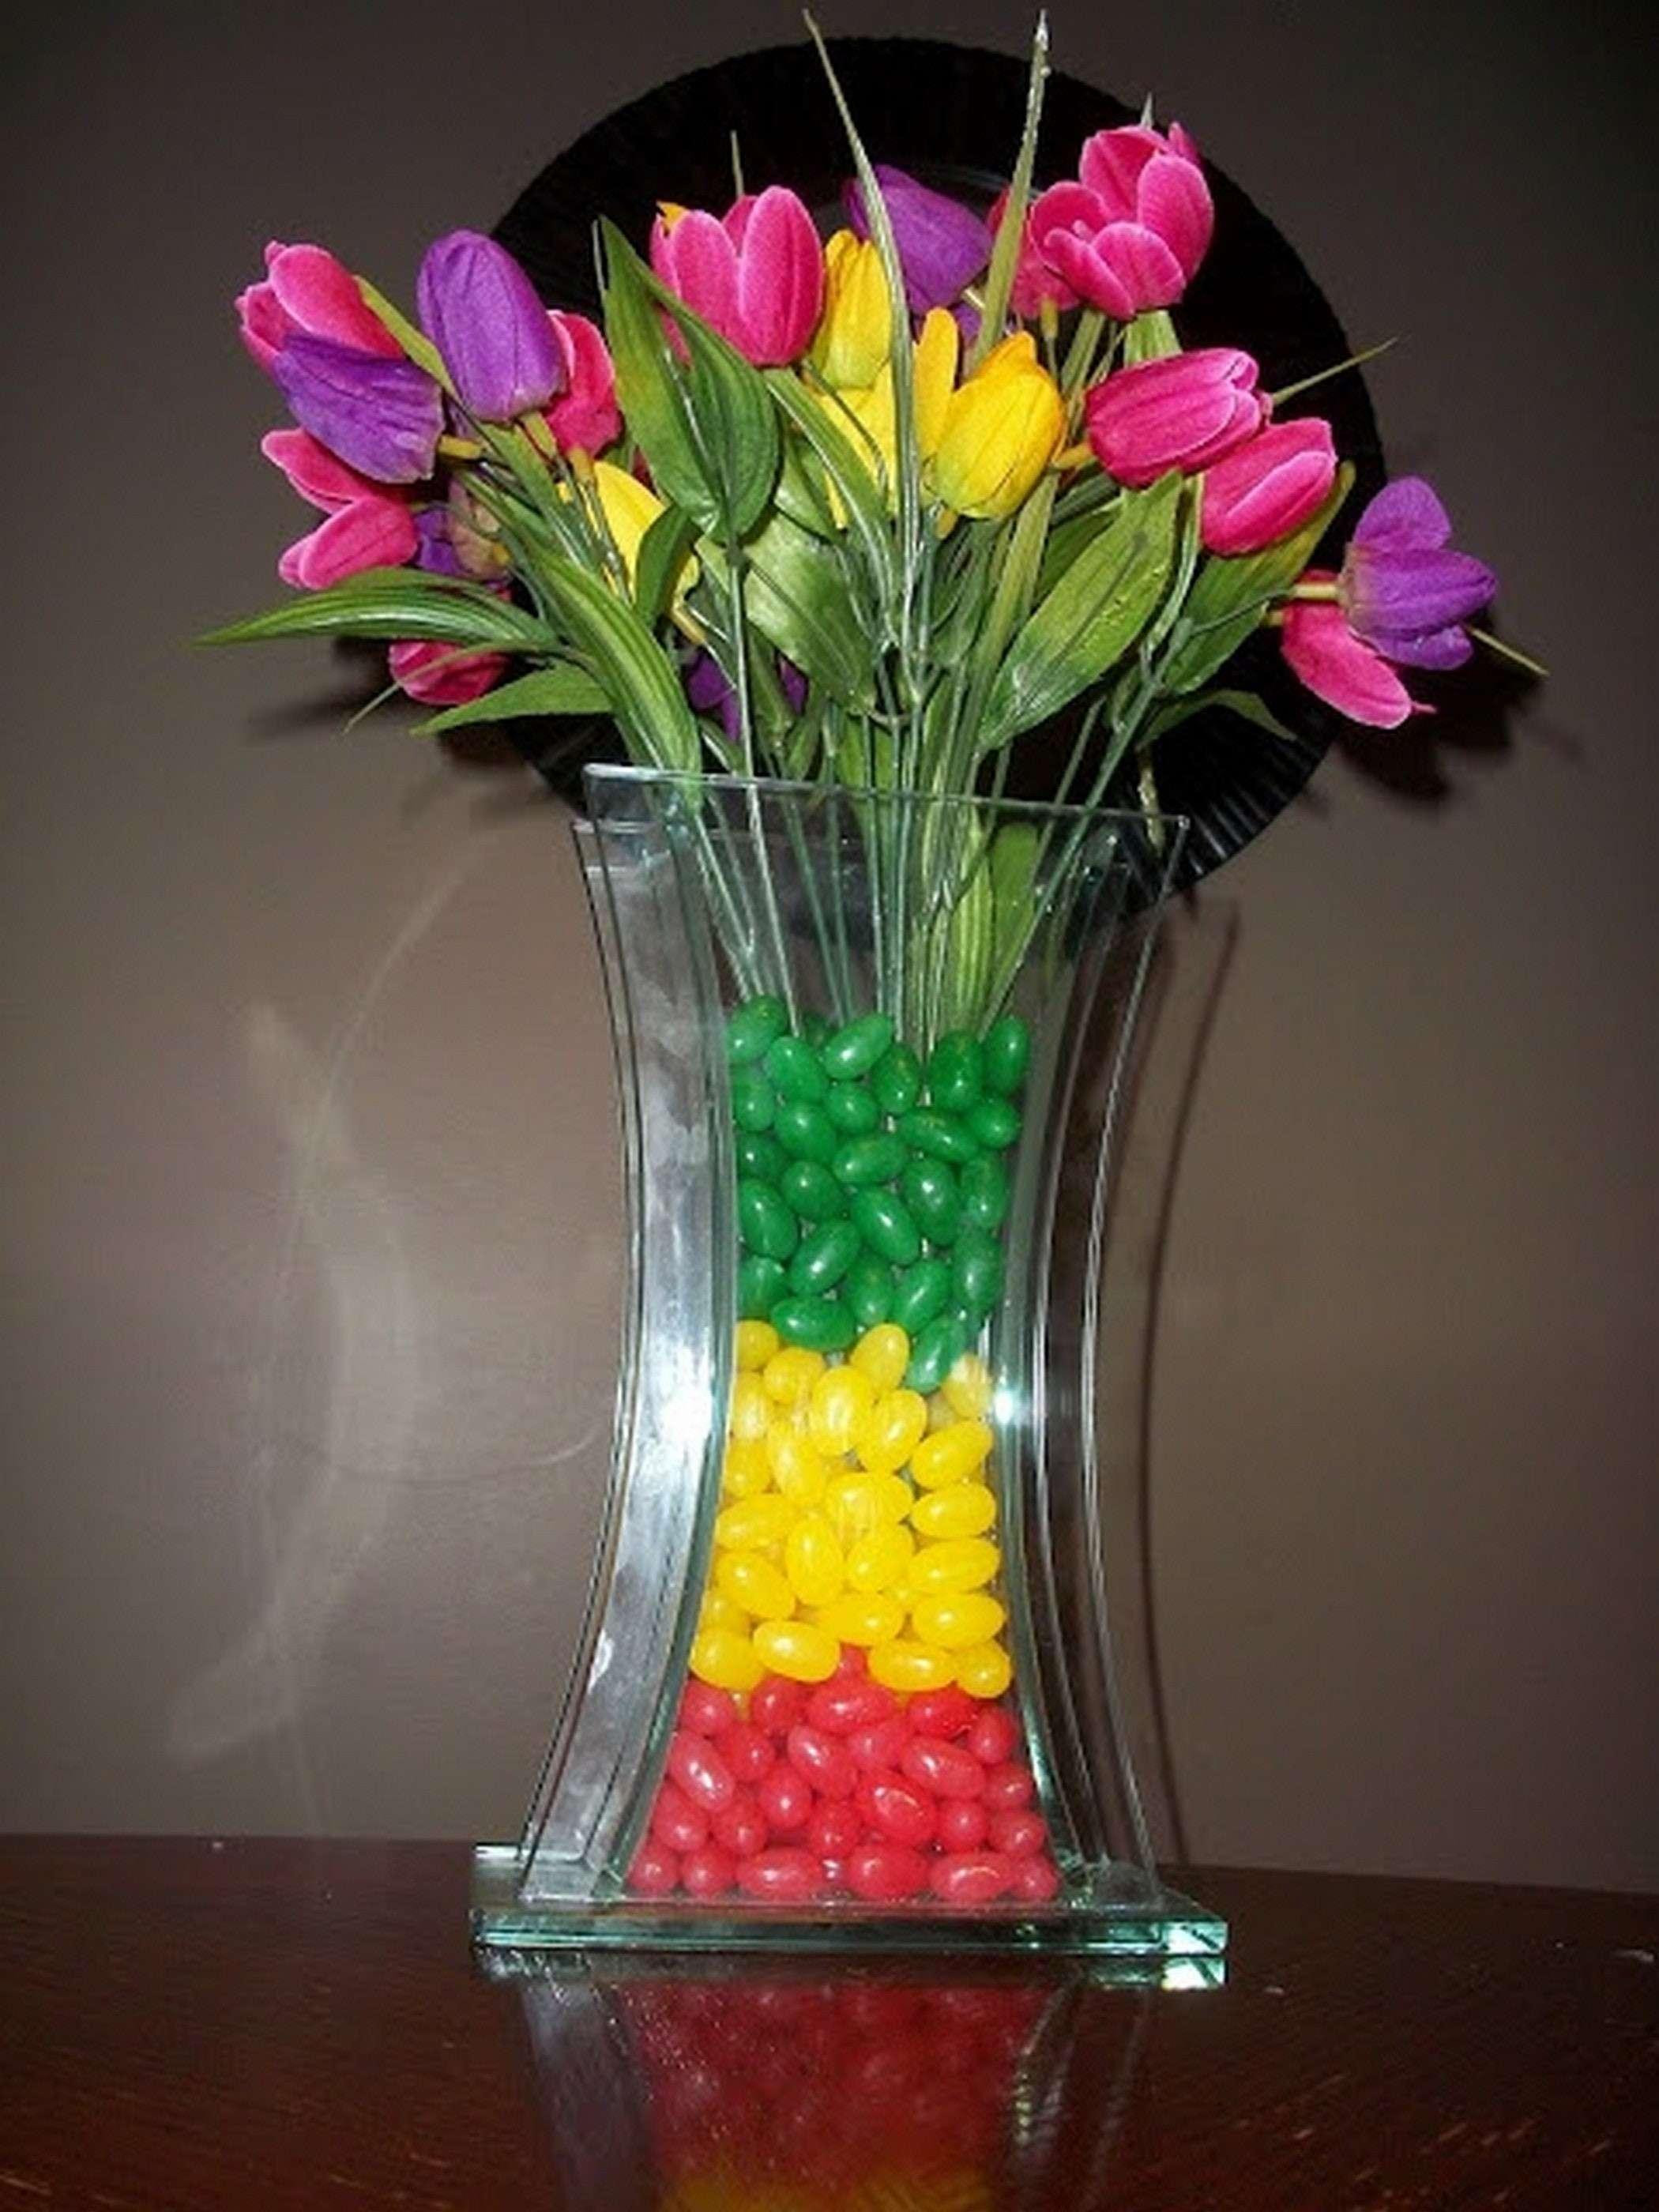 25 Stylish Flowers In A Round Vase 2024 free download flowers in a round vase of easy diy ideas fresh diy home decor vaseh vases decorative flower throughout easy diy ideas beautiful 15 cheap and easy diy vase filler ideas 3h vases flower i